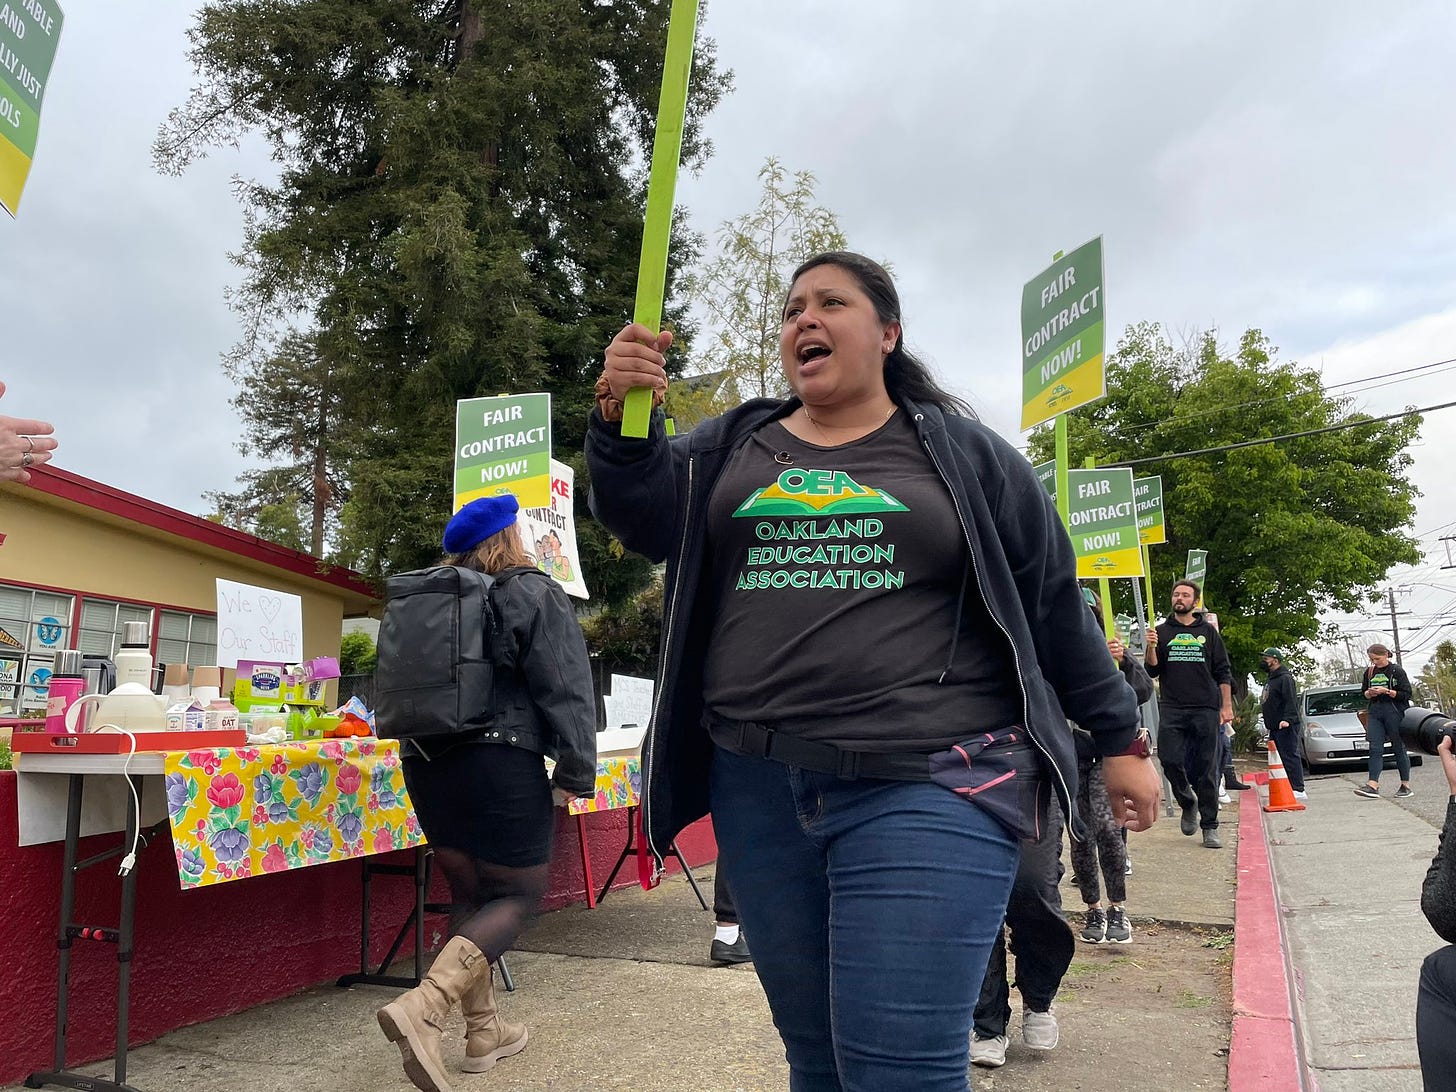 A person holds a sign on a picket line while wearing an Oakland Education Association shirt.